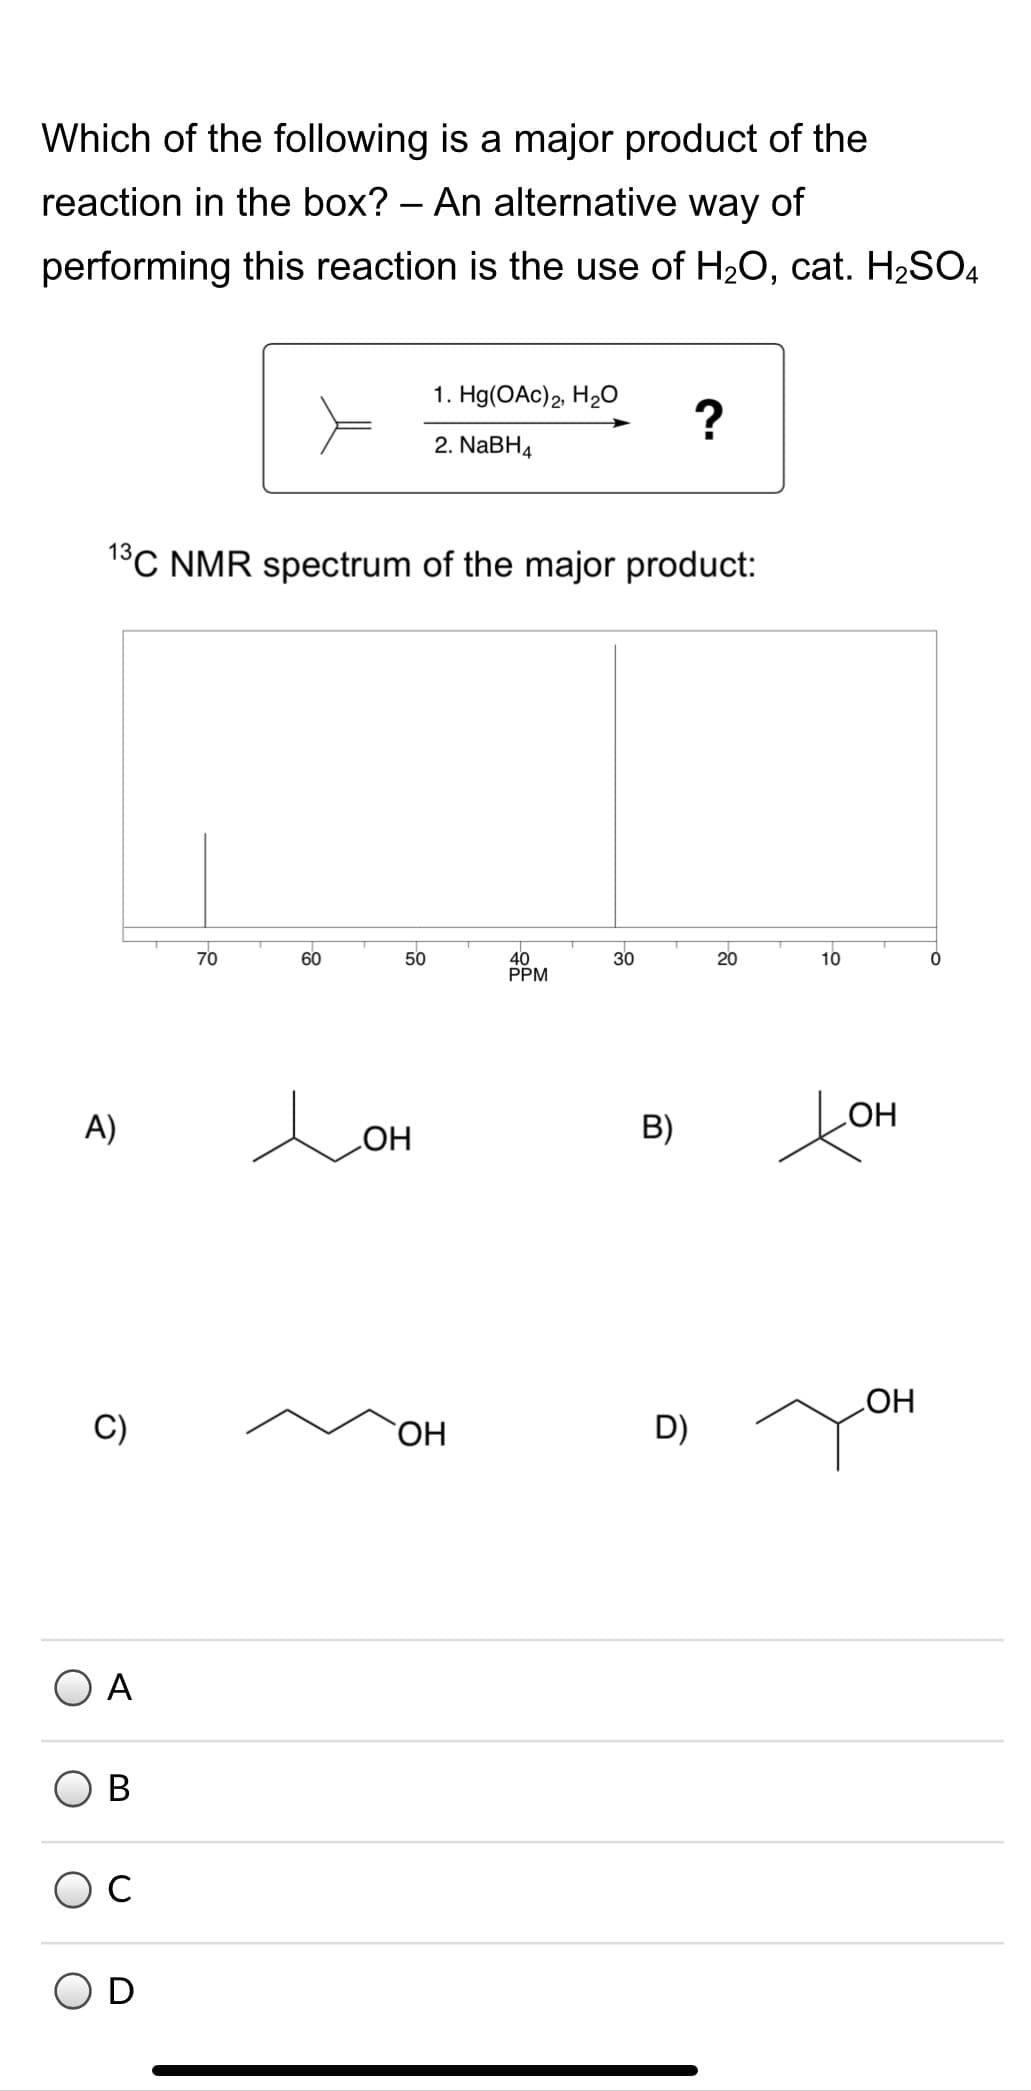 Which of the following is a major product of the
reaction in the box? – An alternative way of
performing this reaction is the use of H20, cat. H2SO4
1. Hg(OAc)2, H2O
2. NABH4
1°C NMR spectrum of the major product:
70
40
PPM
60
50
30
20
10
LOH
COH
A)
B)
D)
HO
ОН
O A
B
D
